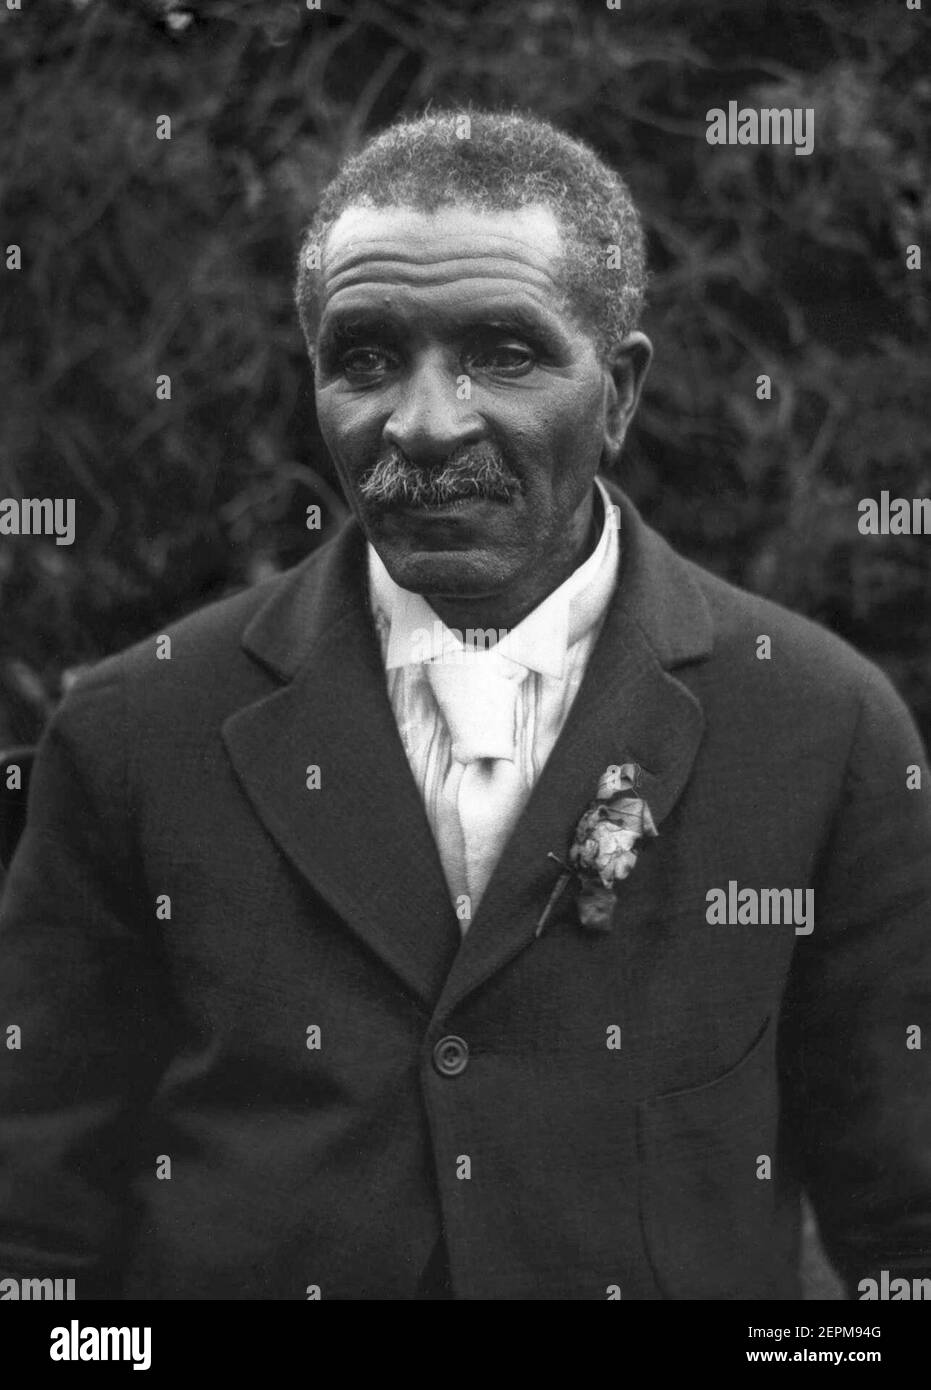 George Washington Carver (c1864–1943) at Voorhees College in 1921. Carver, the most prominent black scientist of the early 20th century, was a professor at Tuskegee Institute (now Tuskegee University). (USA) Stock Photo